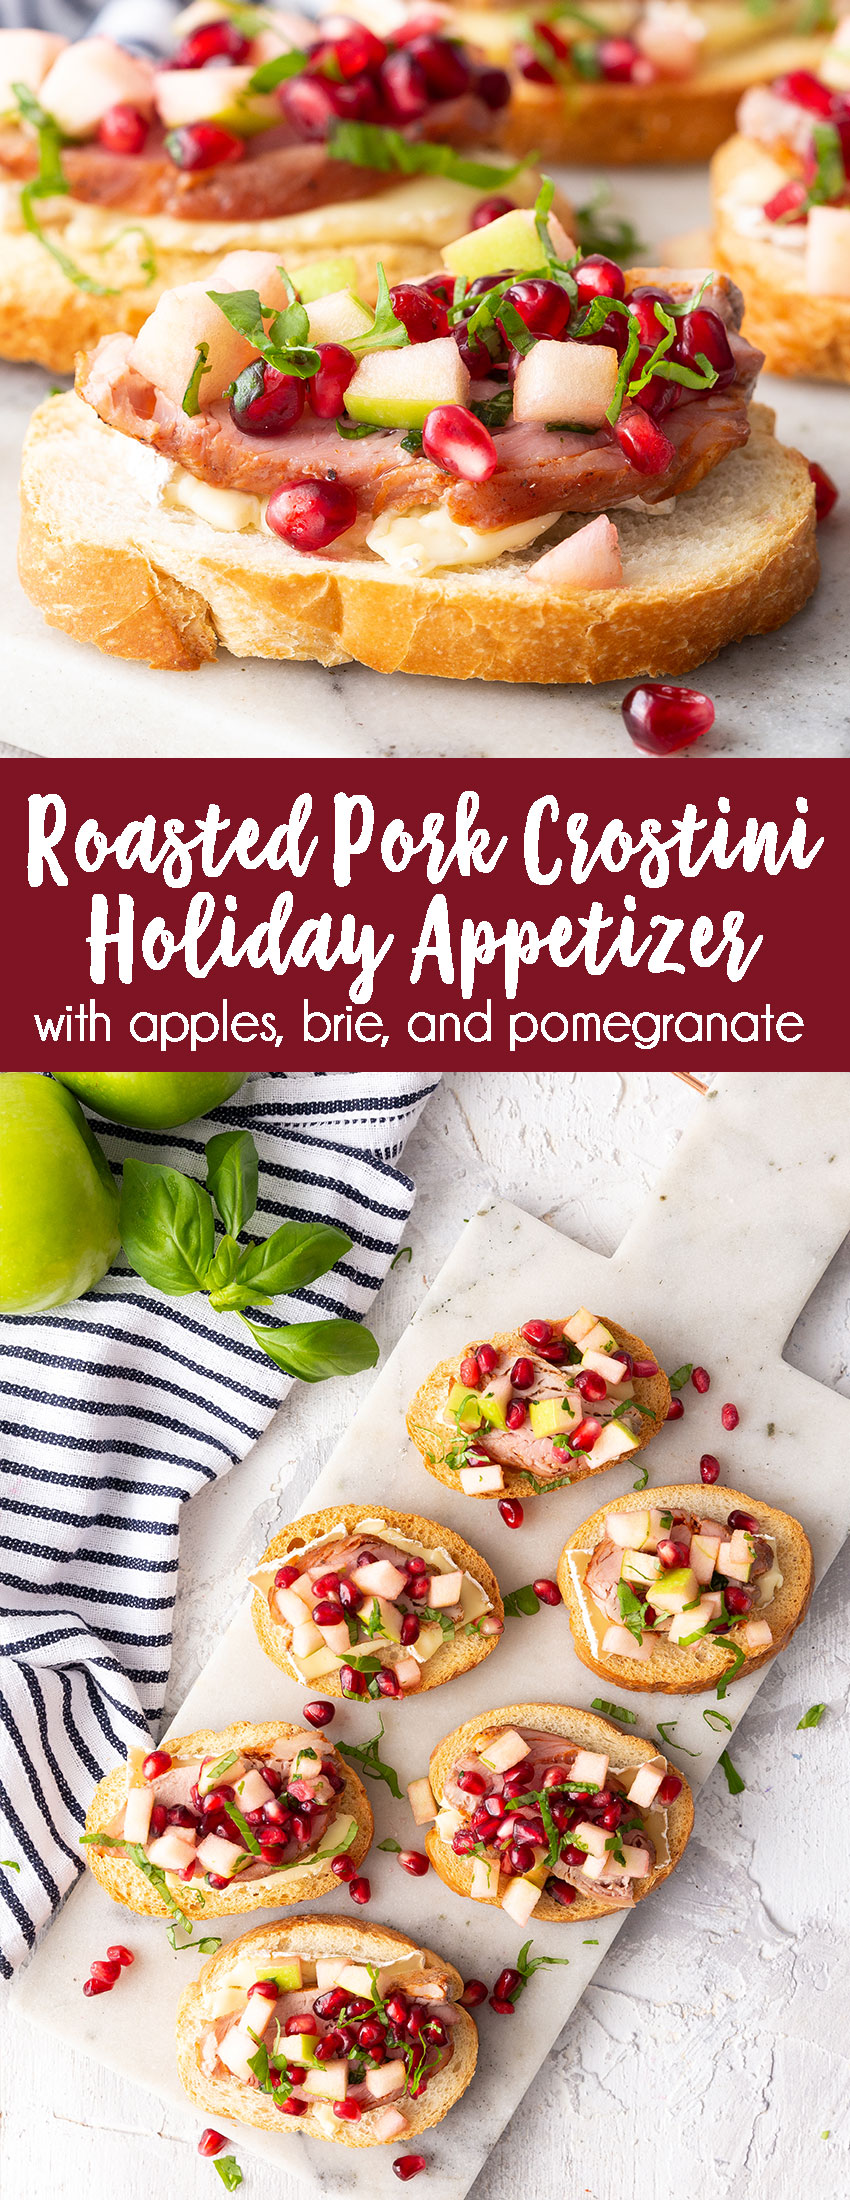 Roasted Pork Crostini Holiday Appetizer with green apple, pomegranate, and brie